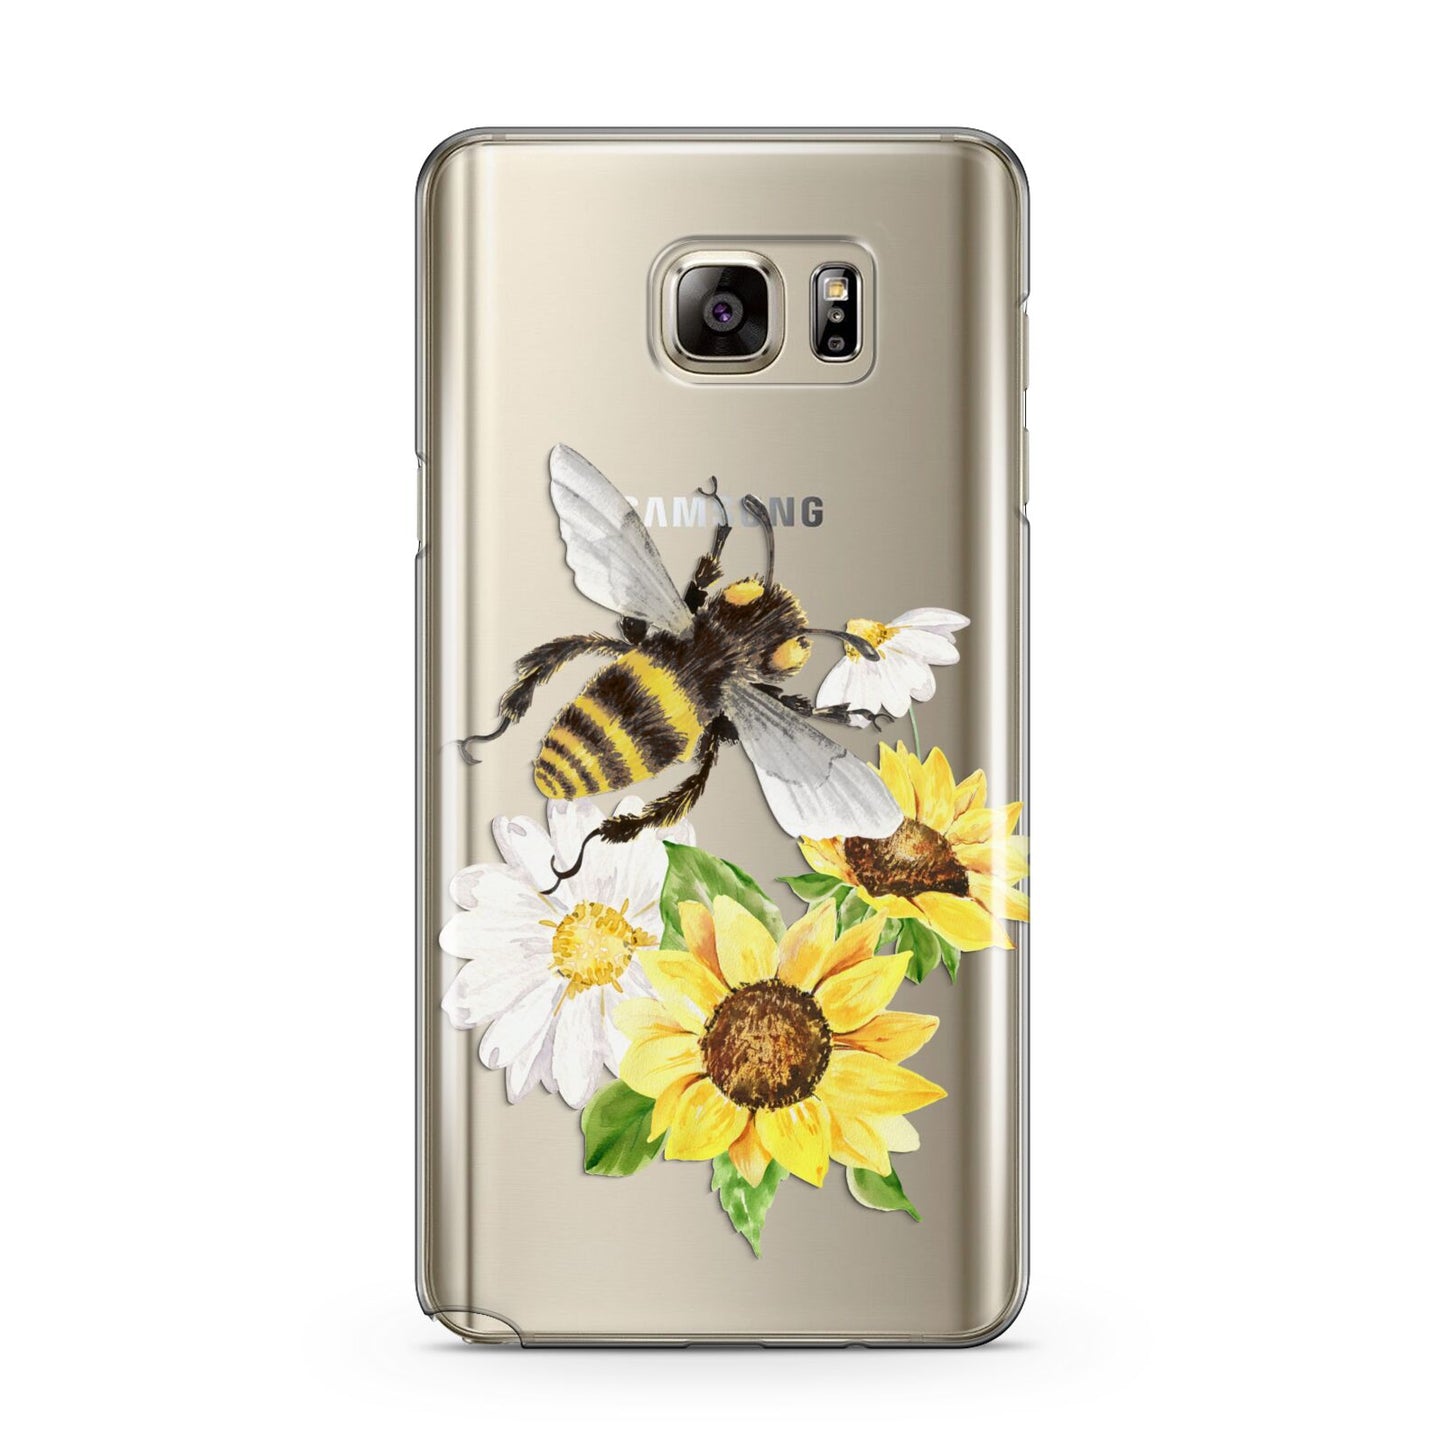 Watercolour Bee and Sunflowers Samsung Galaxy Note 5 Case